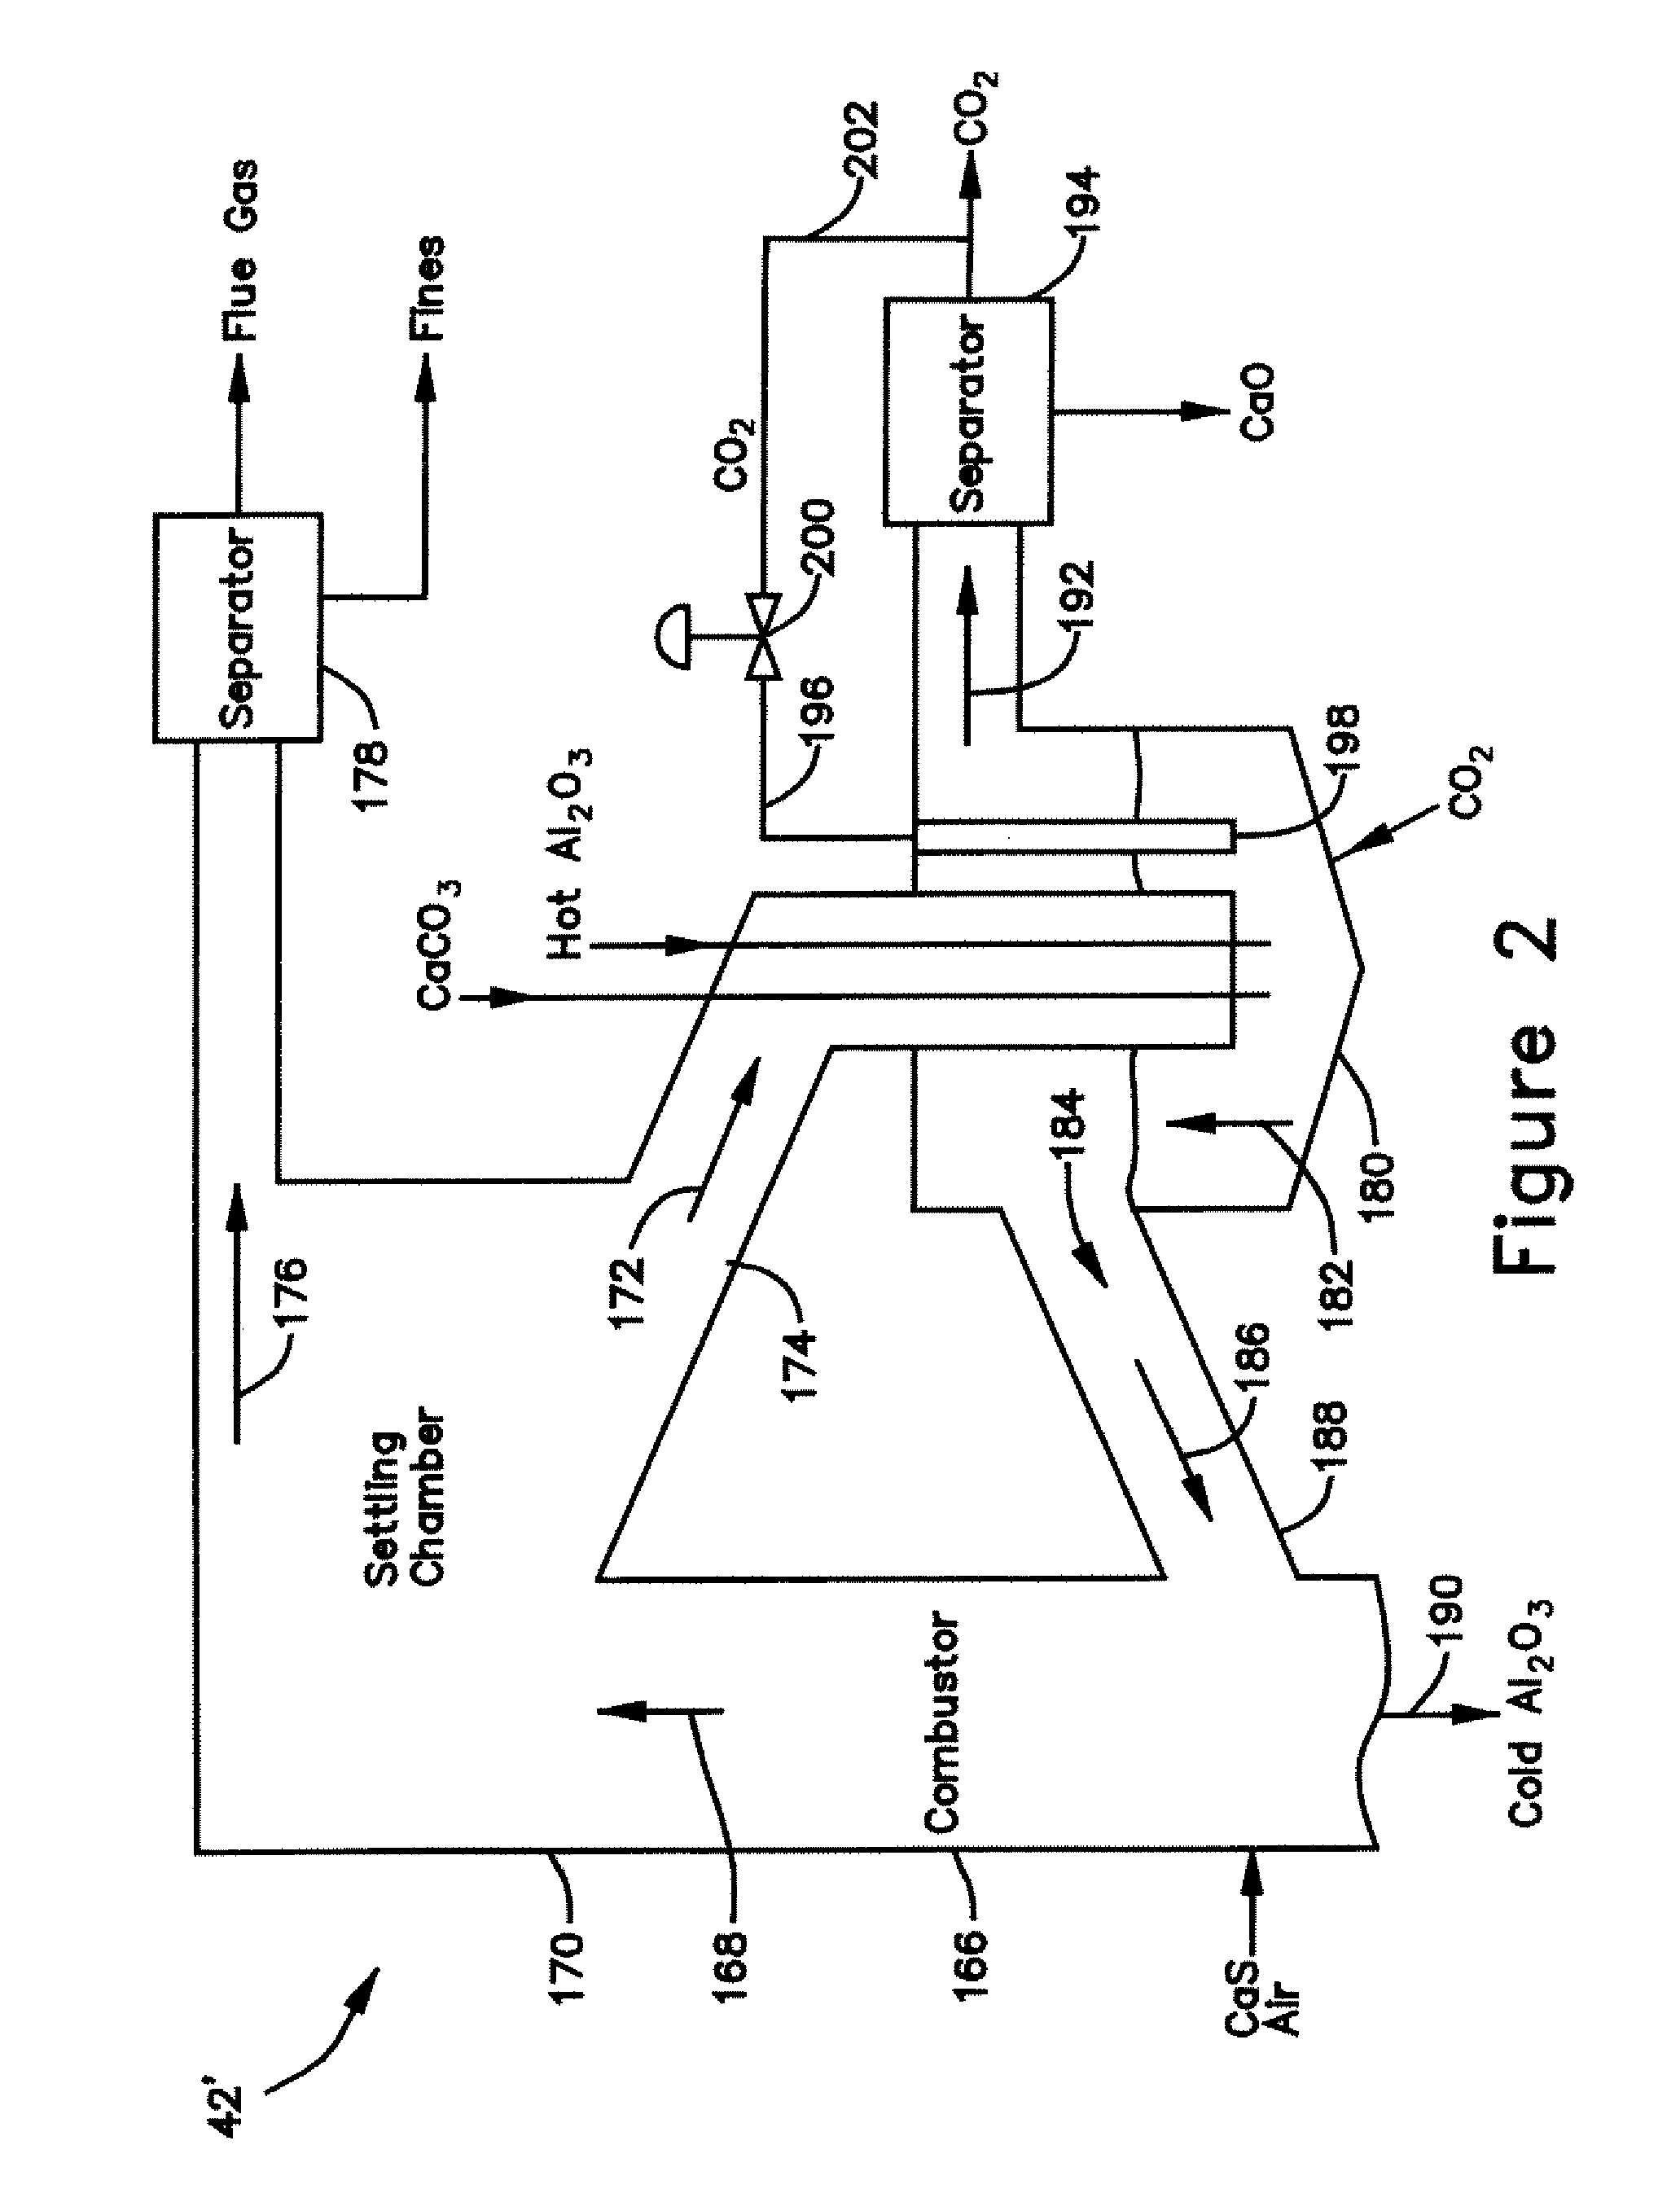 Hot solids gasifier with co2 removal and hydrogen production